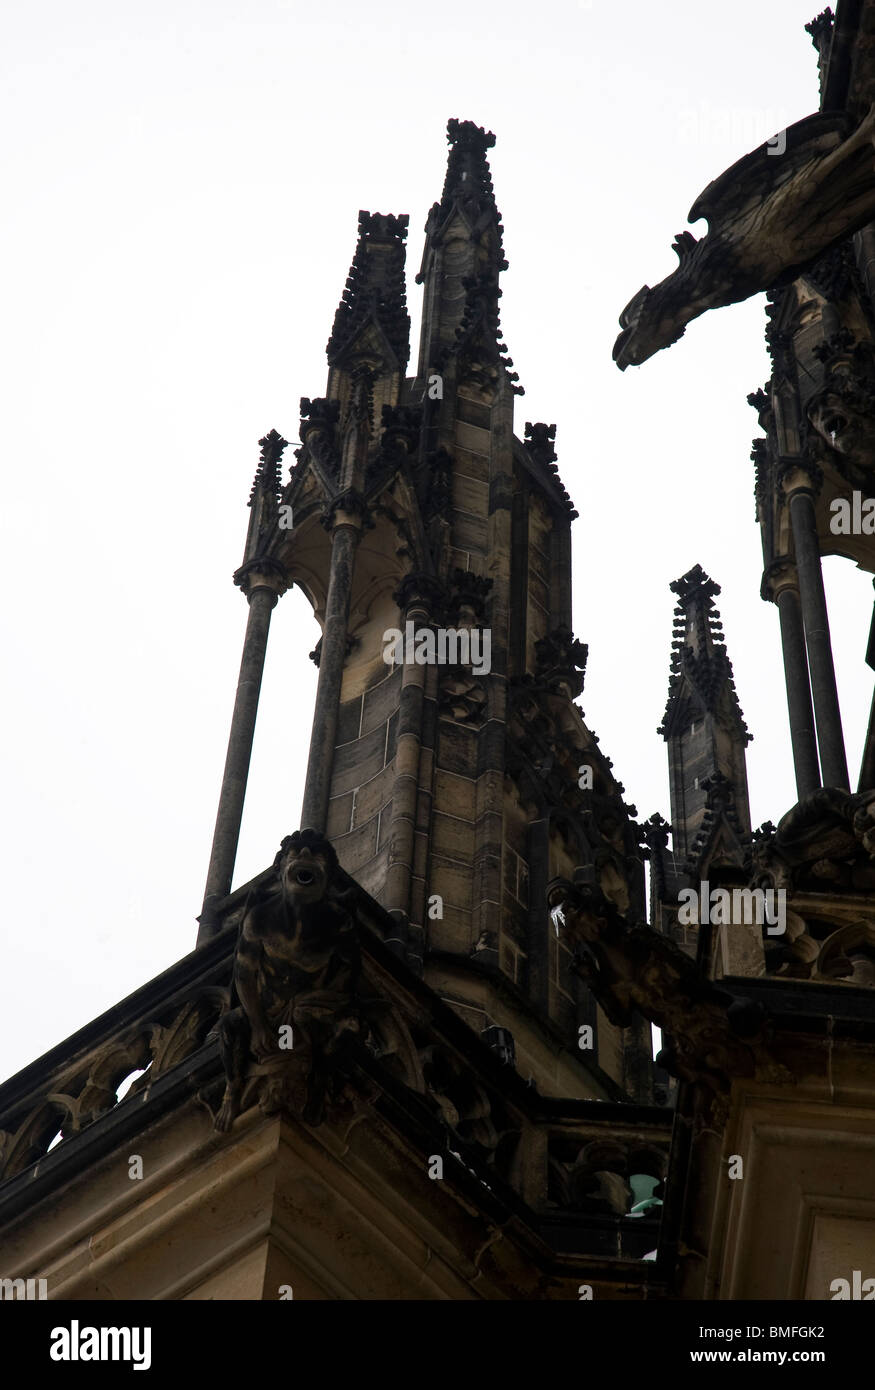 Gargoyles, spires and gothic ornamentation on the buttress of St Vitas Cathedral in Prague Castle Stock Photo